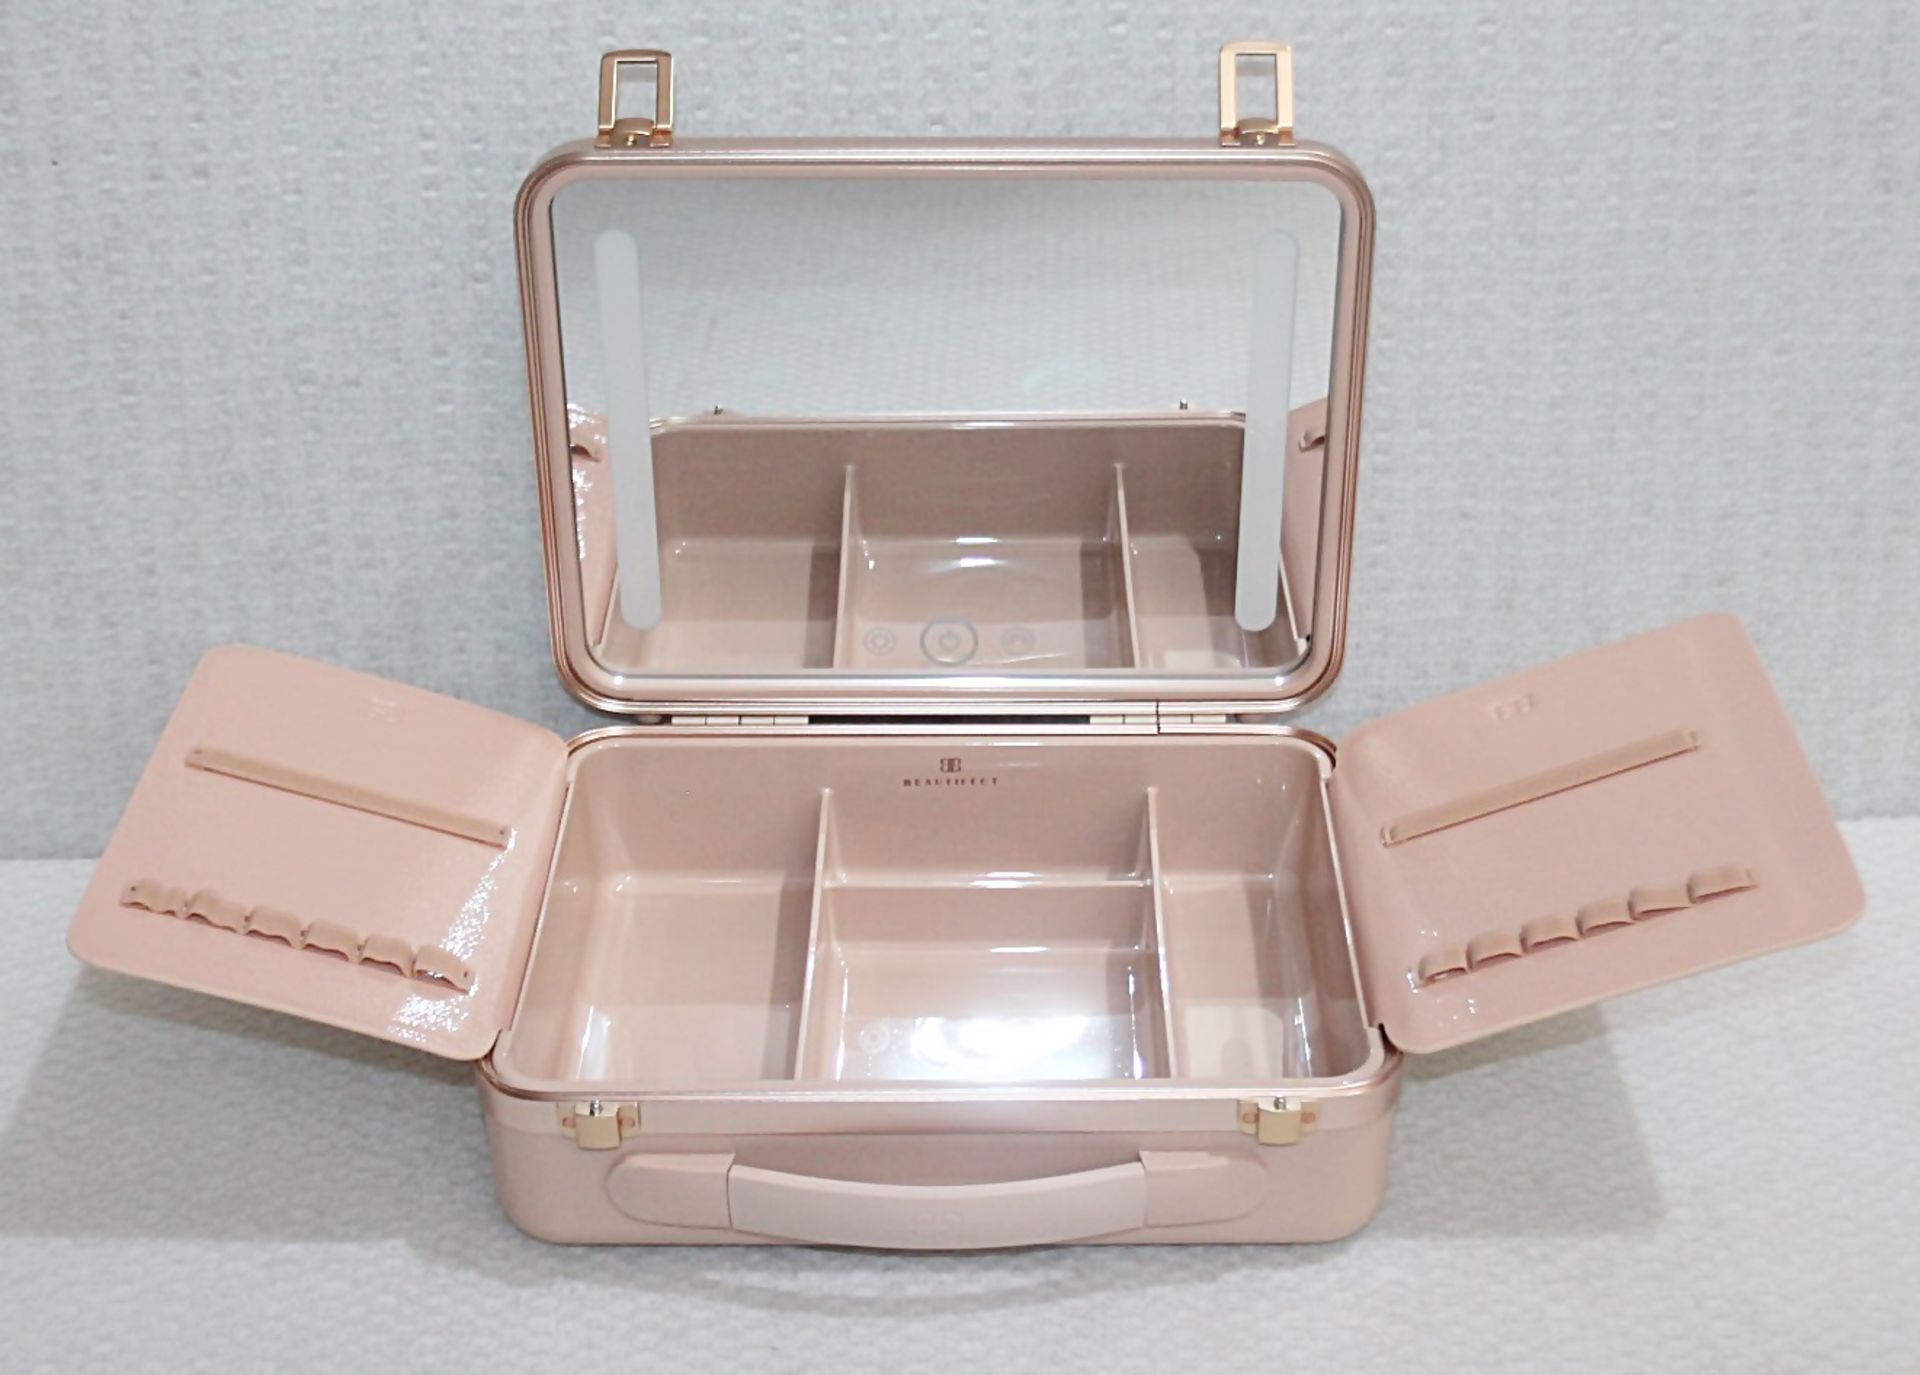 1 x BEAUTIFECT 'Beautifect Box' Make-Up Carry Case With Built-in Illuminated Mirror - RRP £279.00 - Image 3 of 11